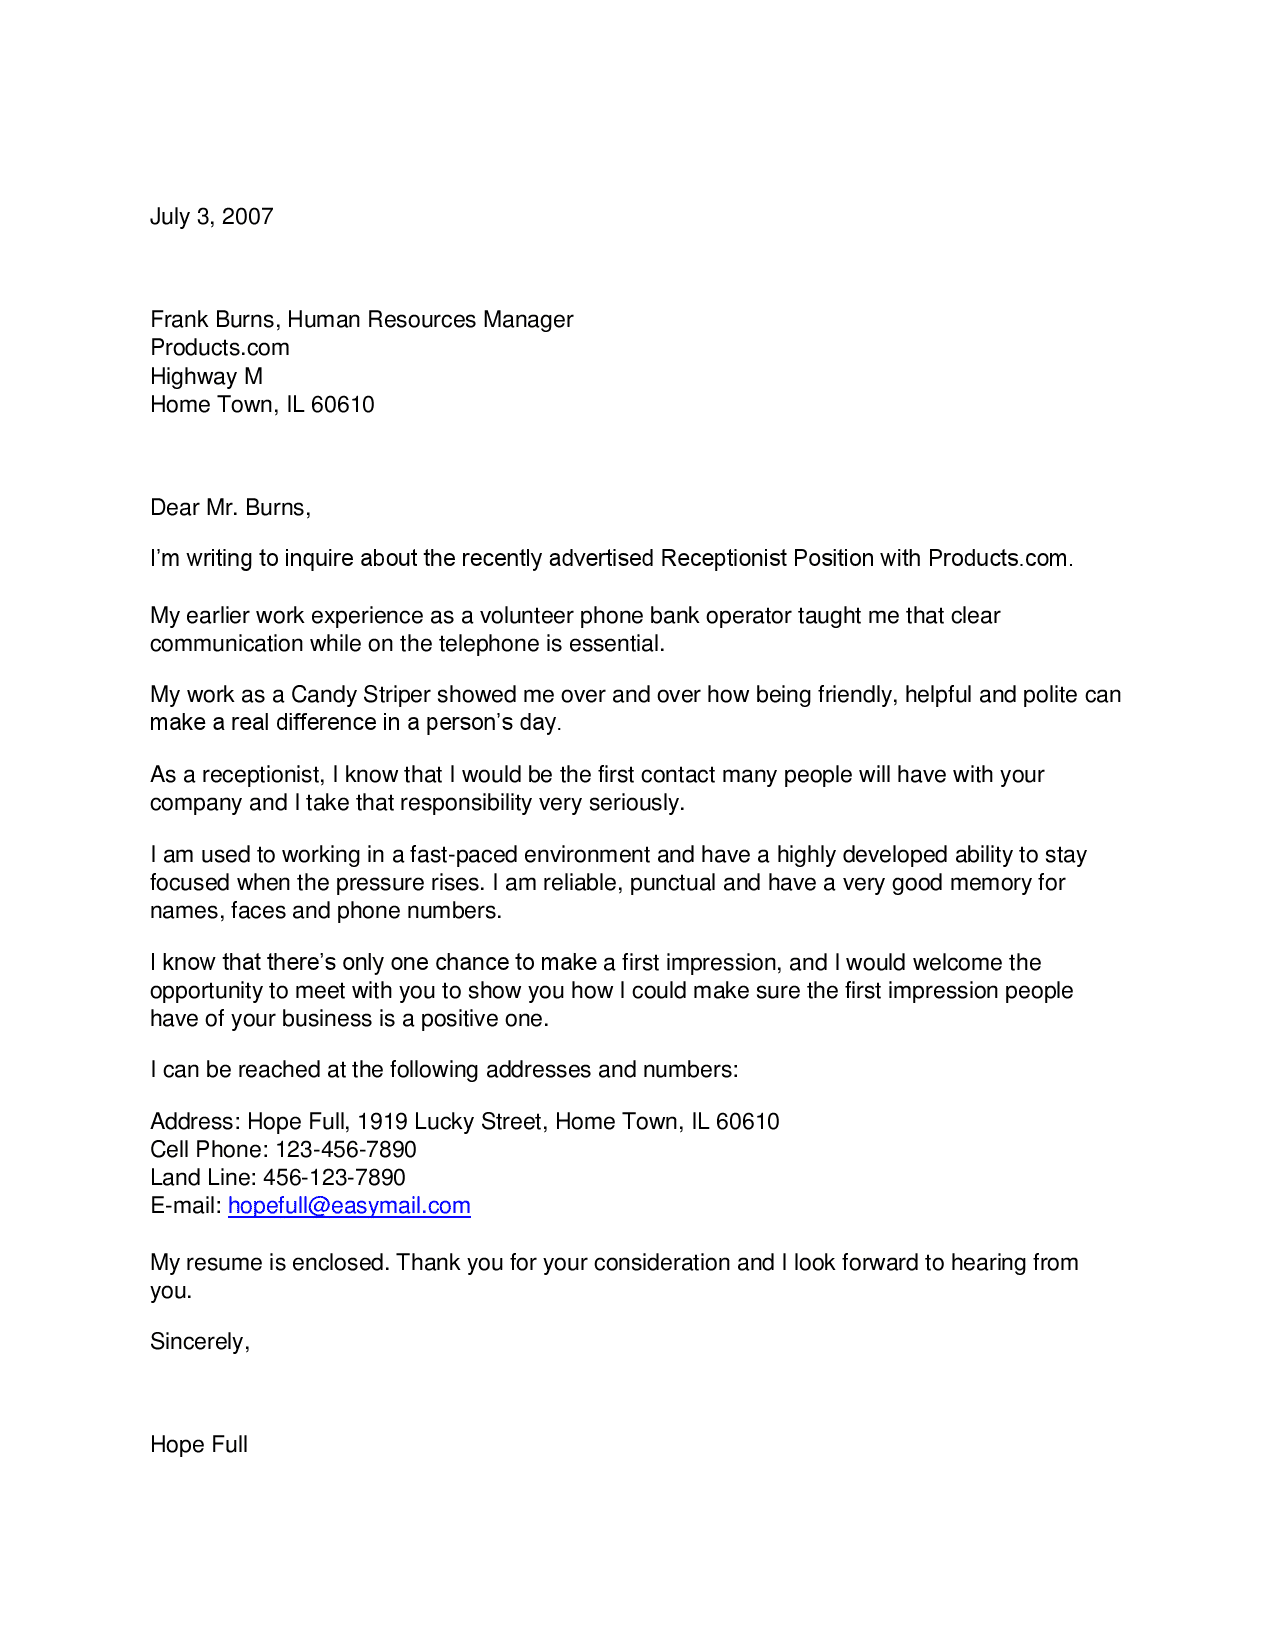 Hotel Receptionist Cover Letter Example